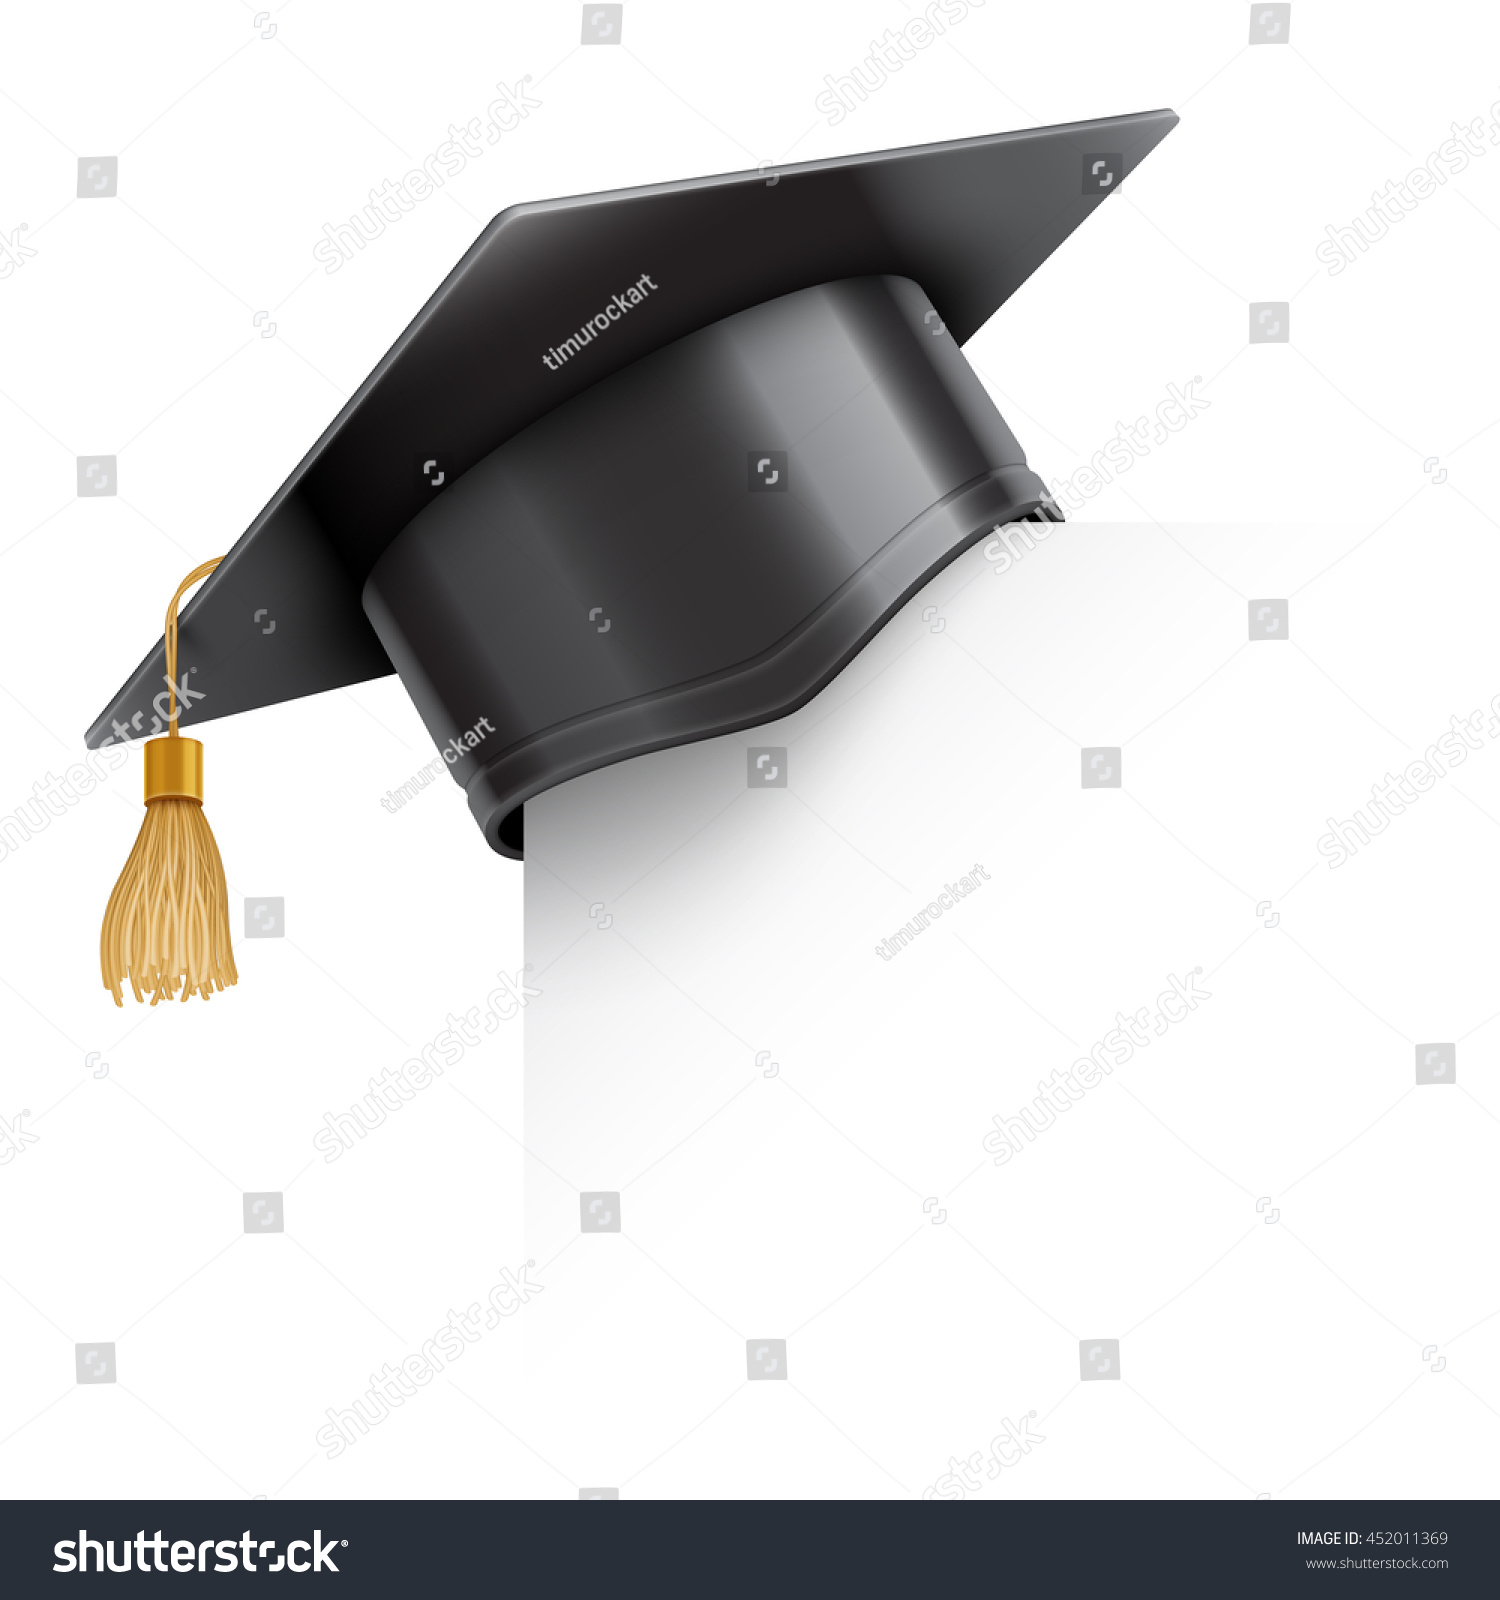 Graduation cap or mortar board on paper corner. Vector education design element isolated on white background #452011369